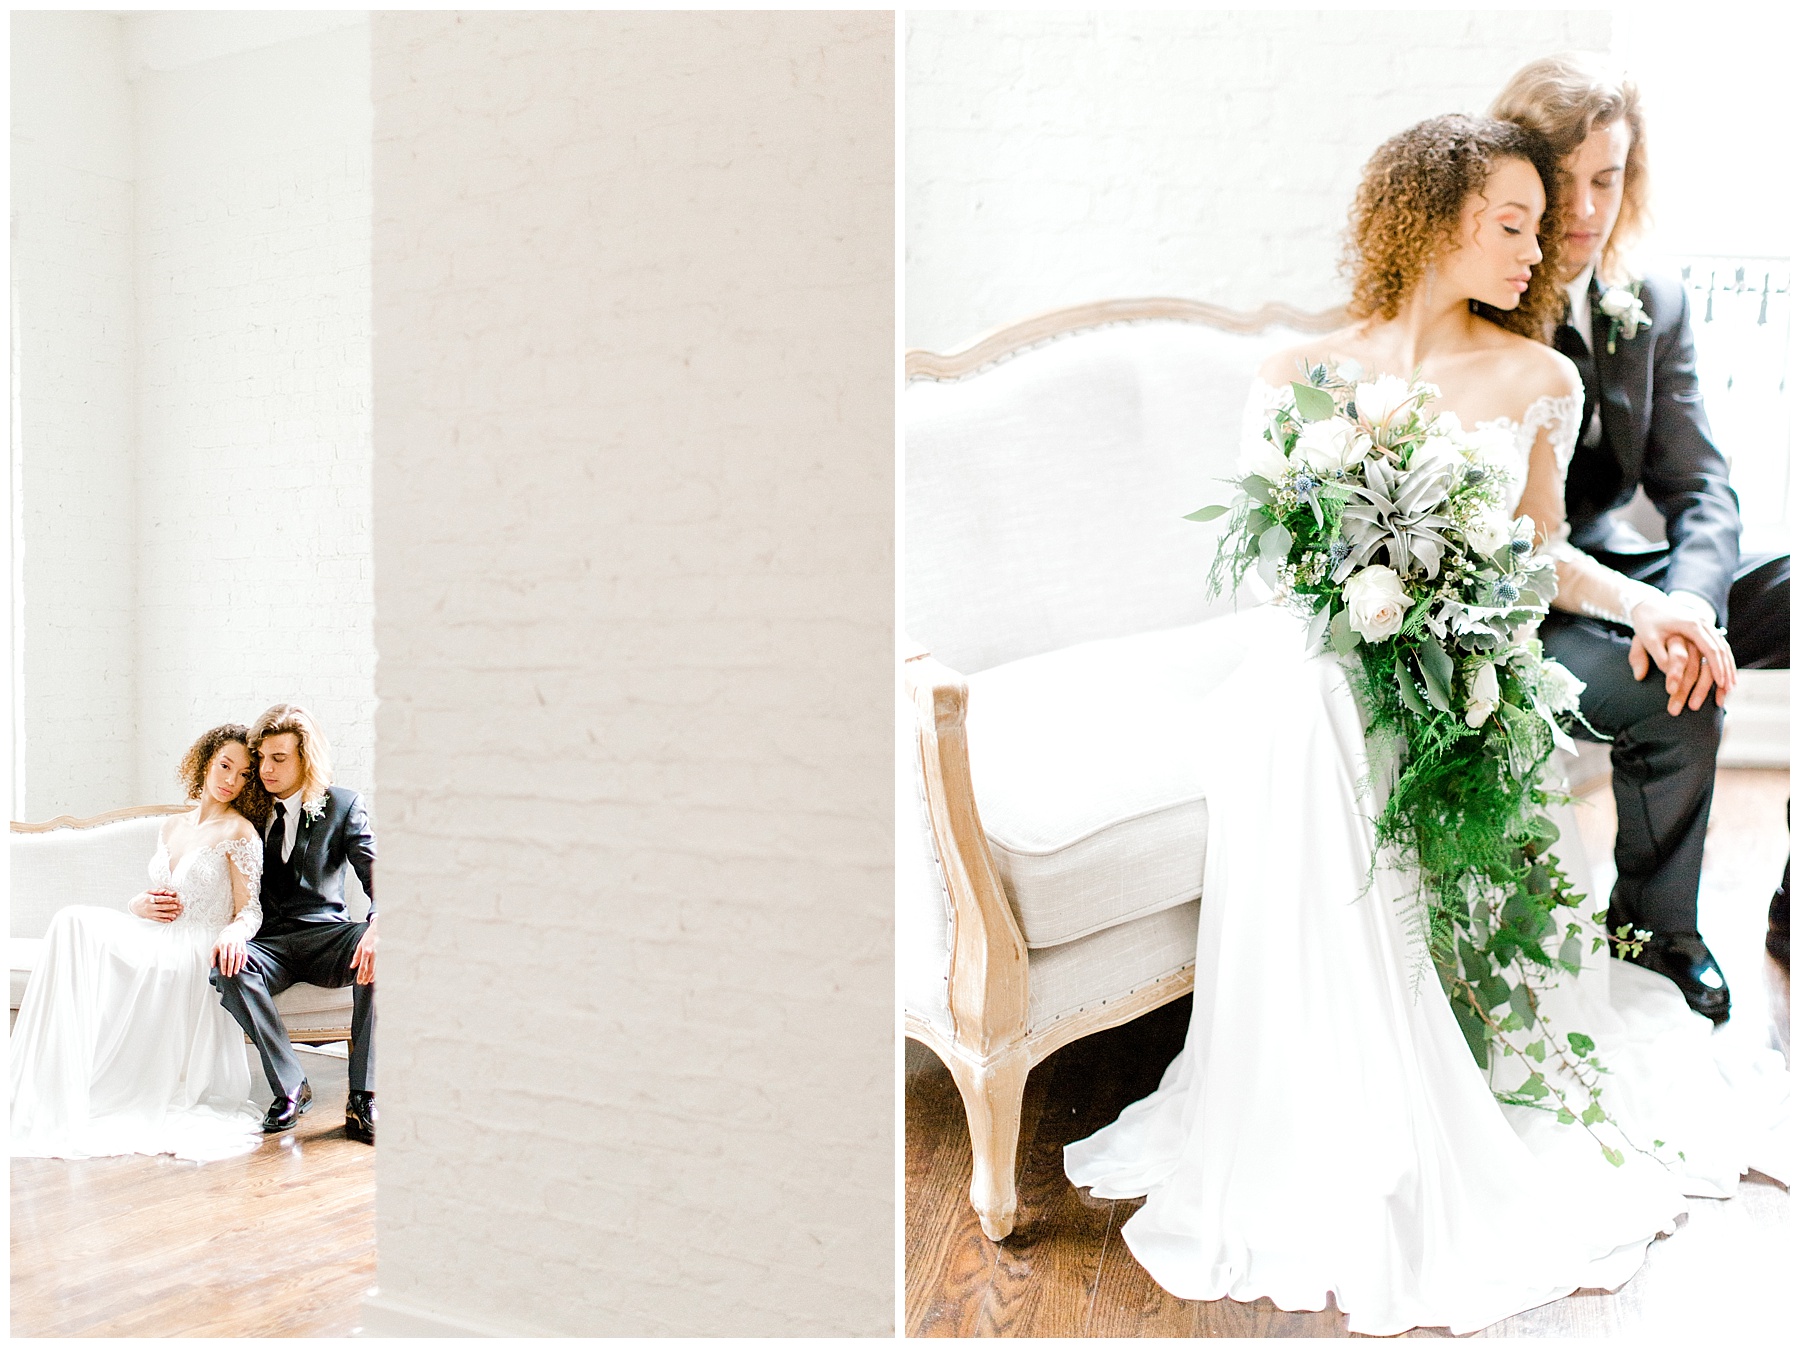 misty saves the day, munaluchi bride, andrew & tianna, the historic post office, studio i do bridals, kathy forrest design